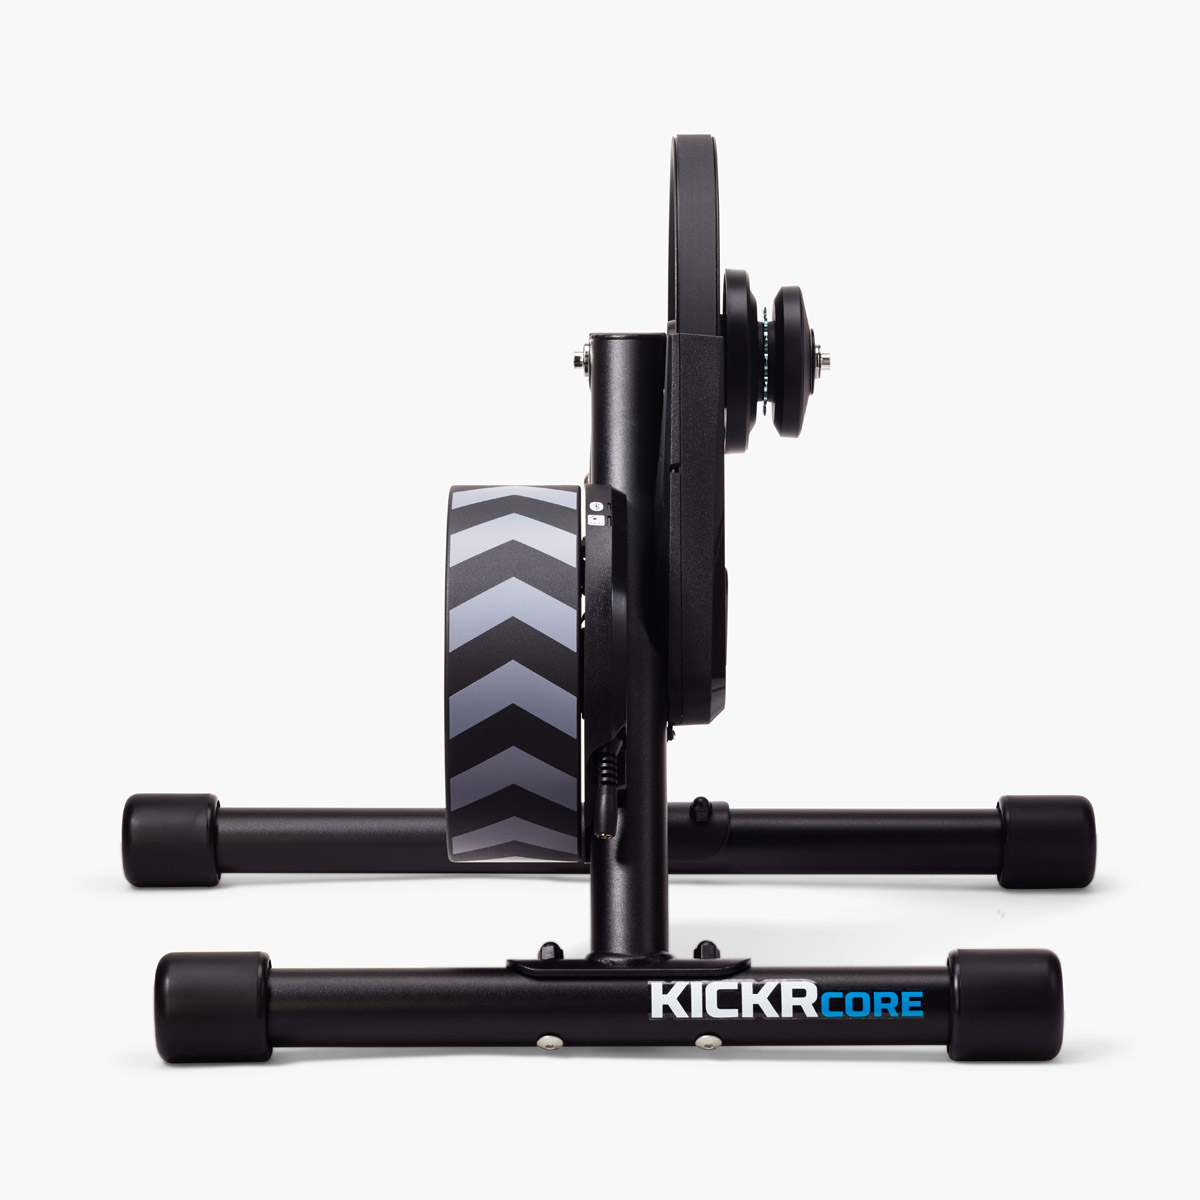 New KICKR CORE Zwift One Trainer Adds Virtual Shifting, Existing